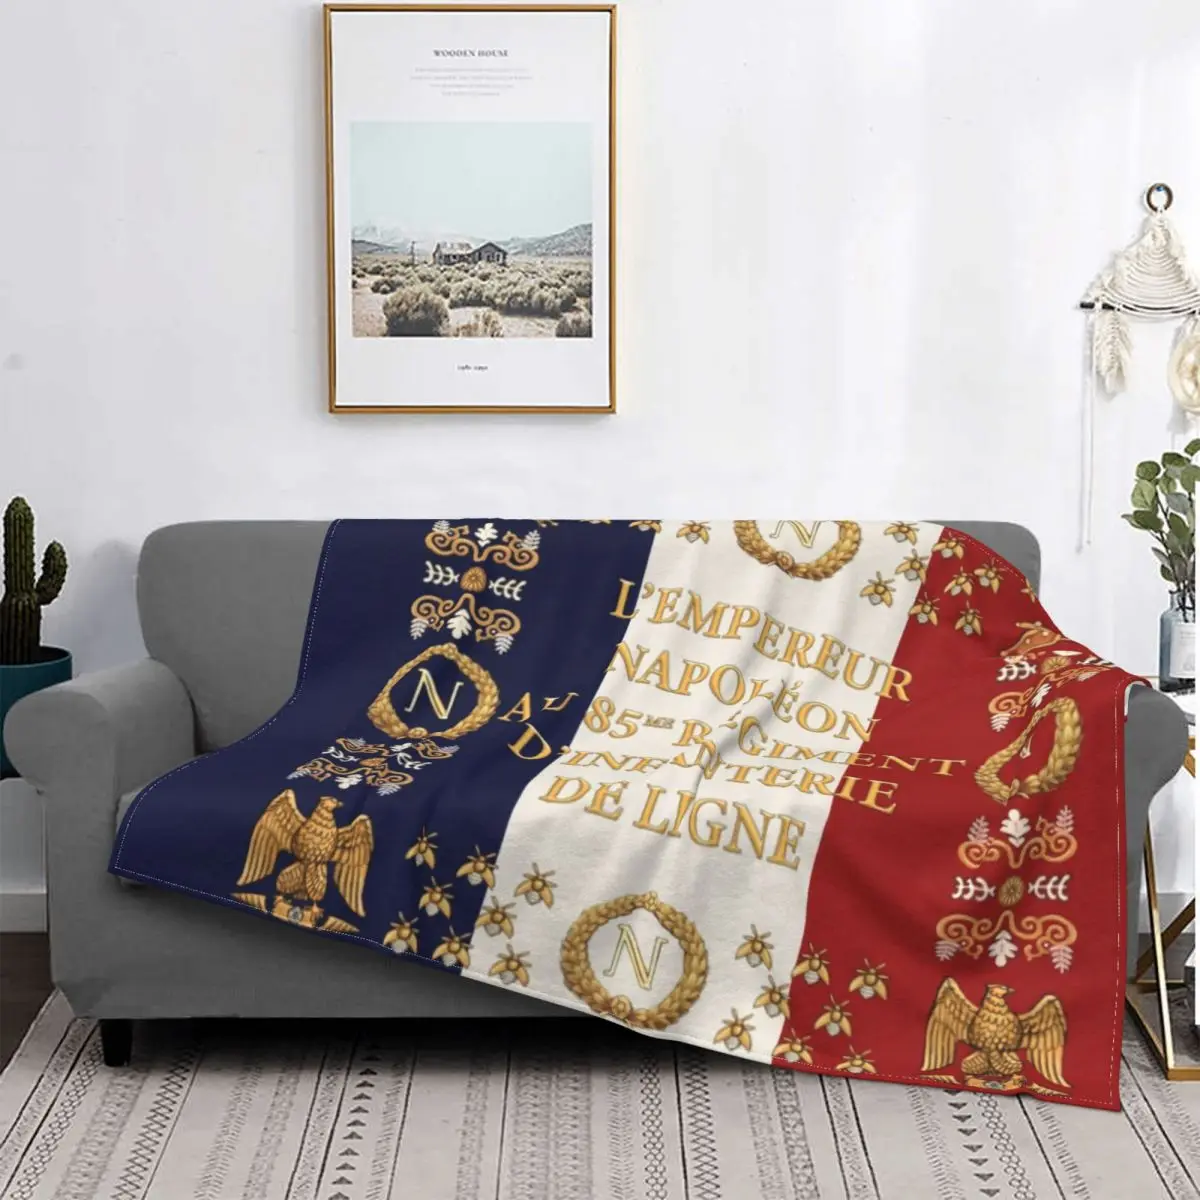 

Napoleonic French 85th Regimental Flag REMASTERED Blanket Warm Fleece Soft Flannel Throw Blankets for Bed Couch Home Spring